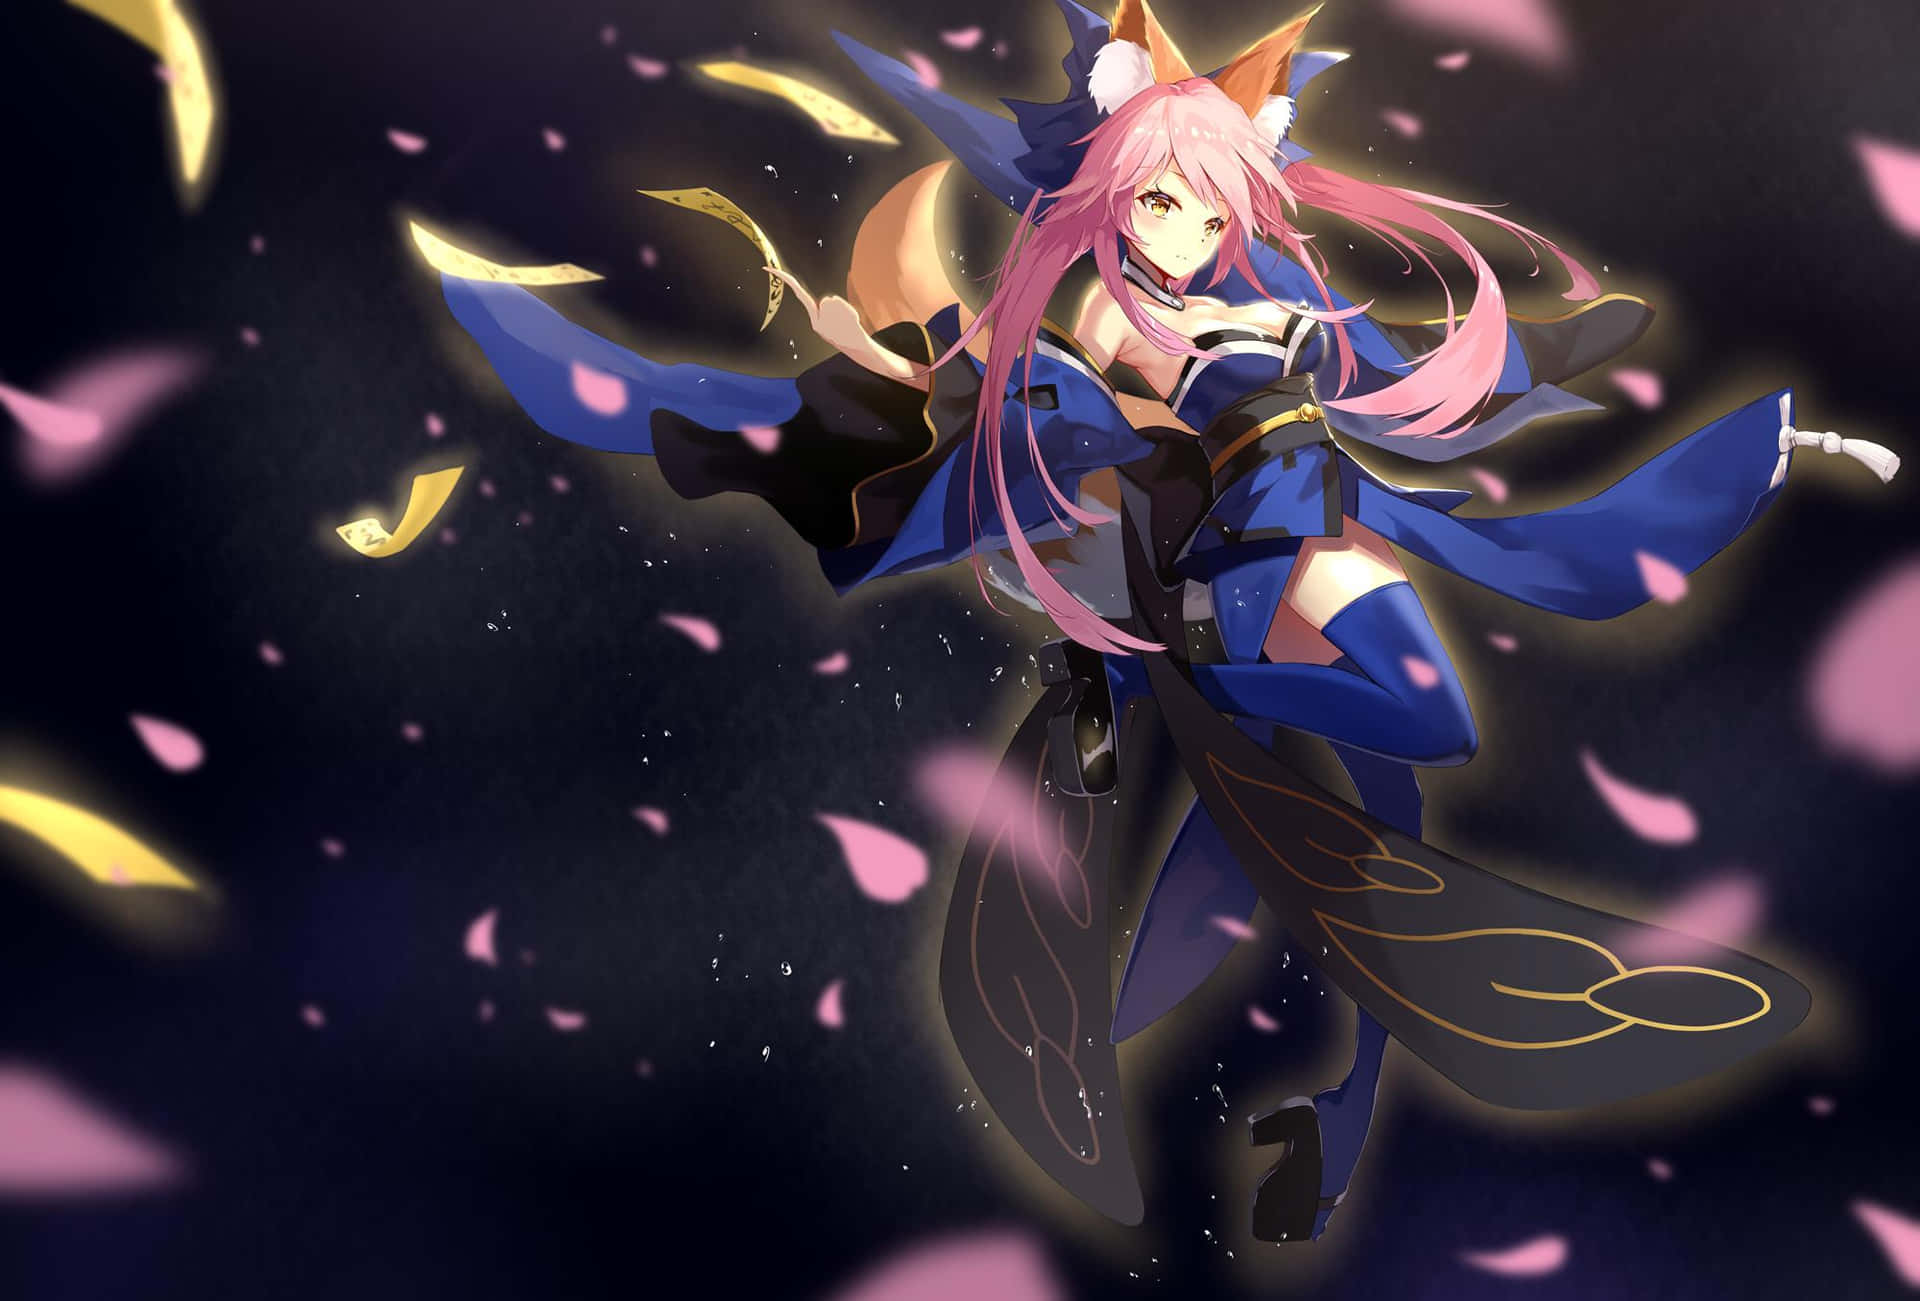 Engaging 3d Anime Wall Art Of Tamamo No Mae From Fate Grand Order Wallpaper